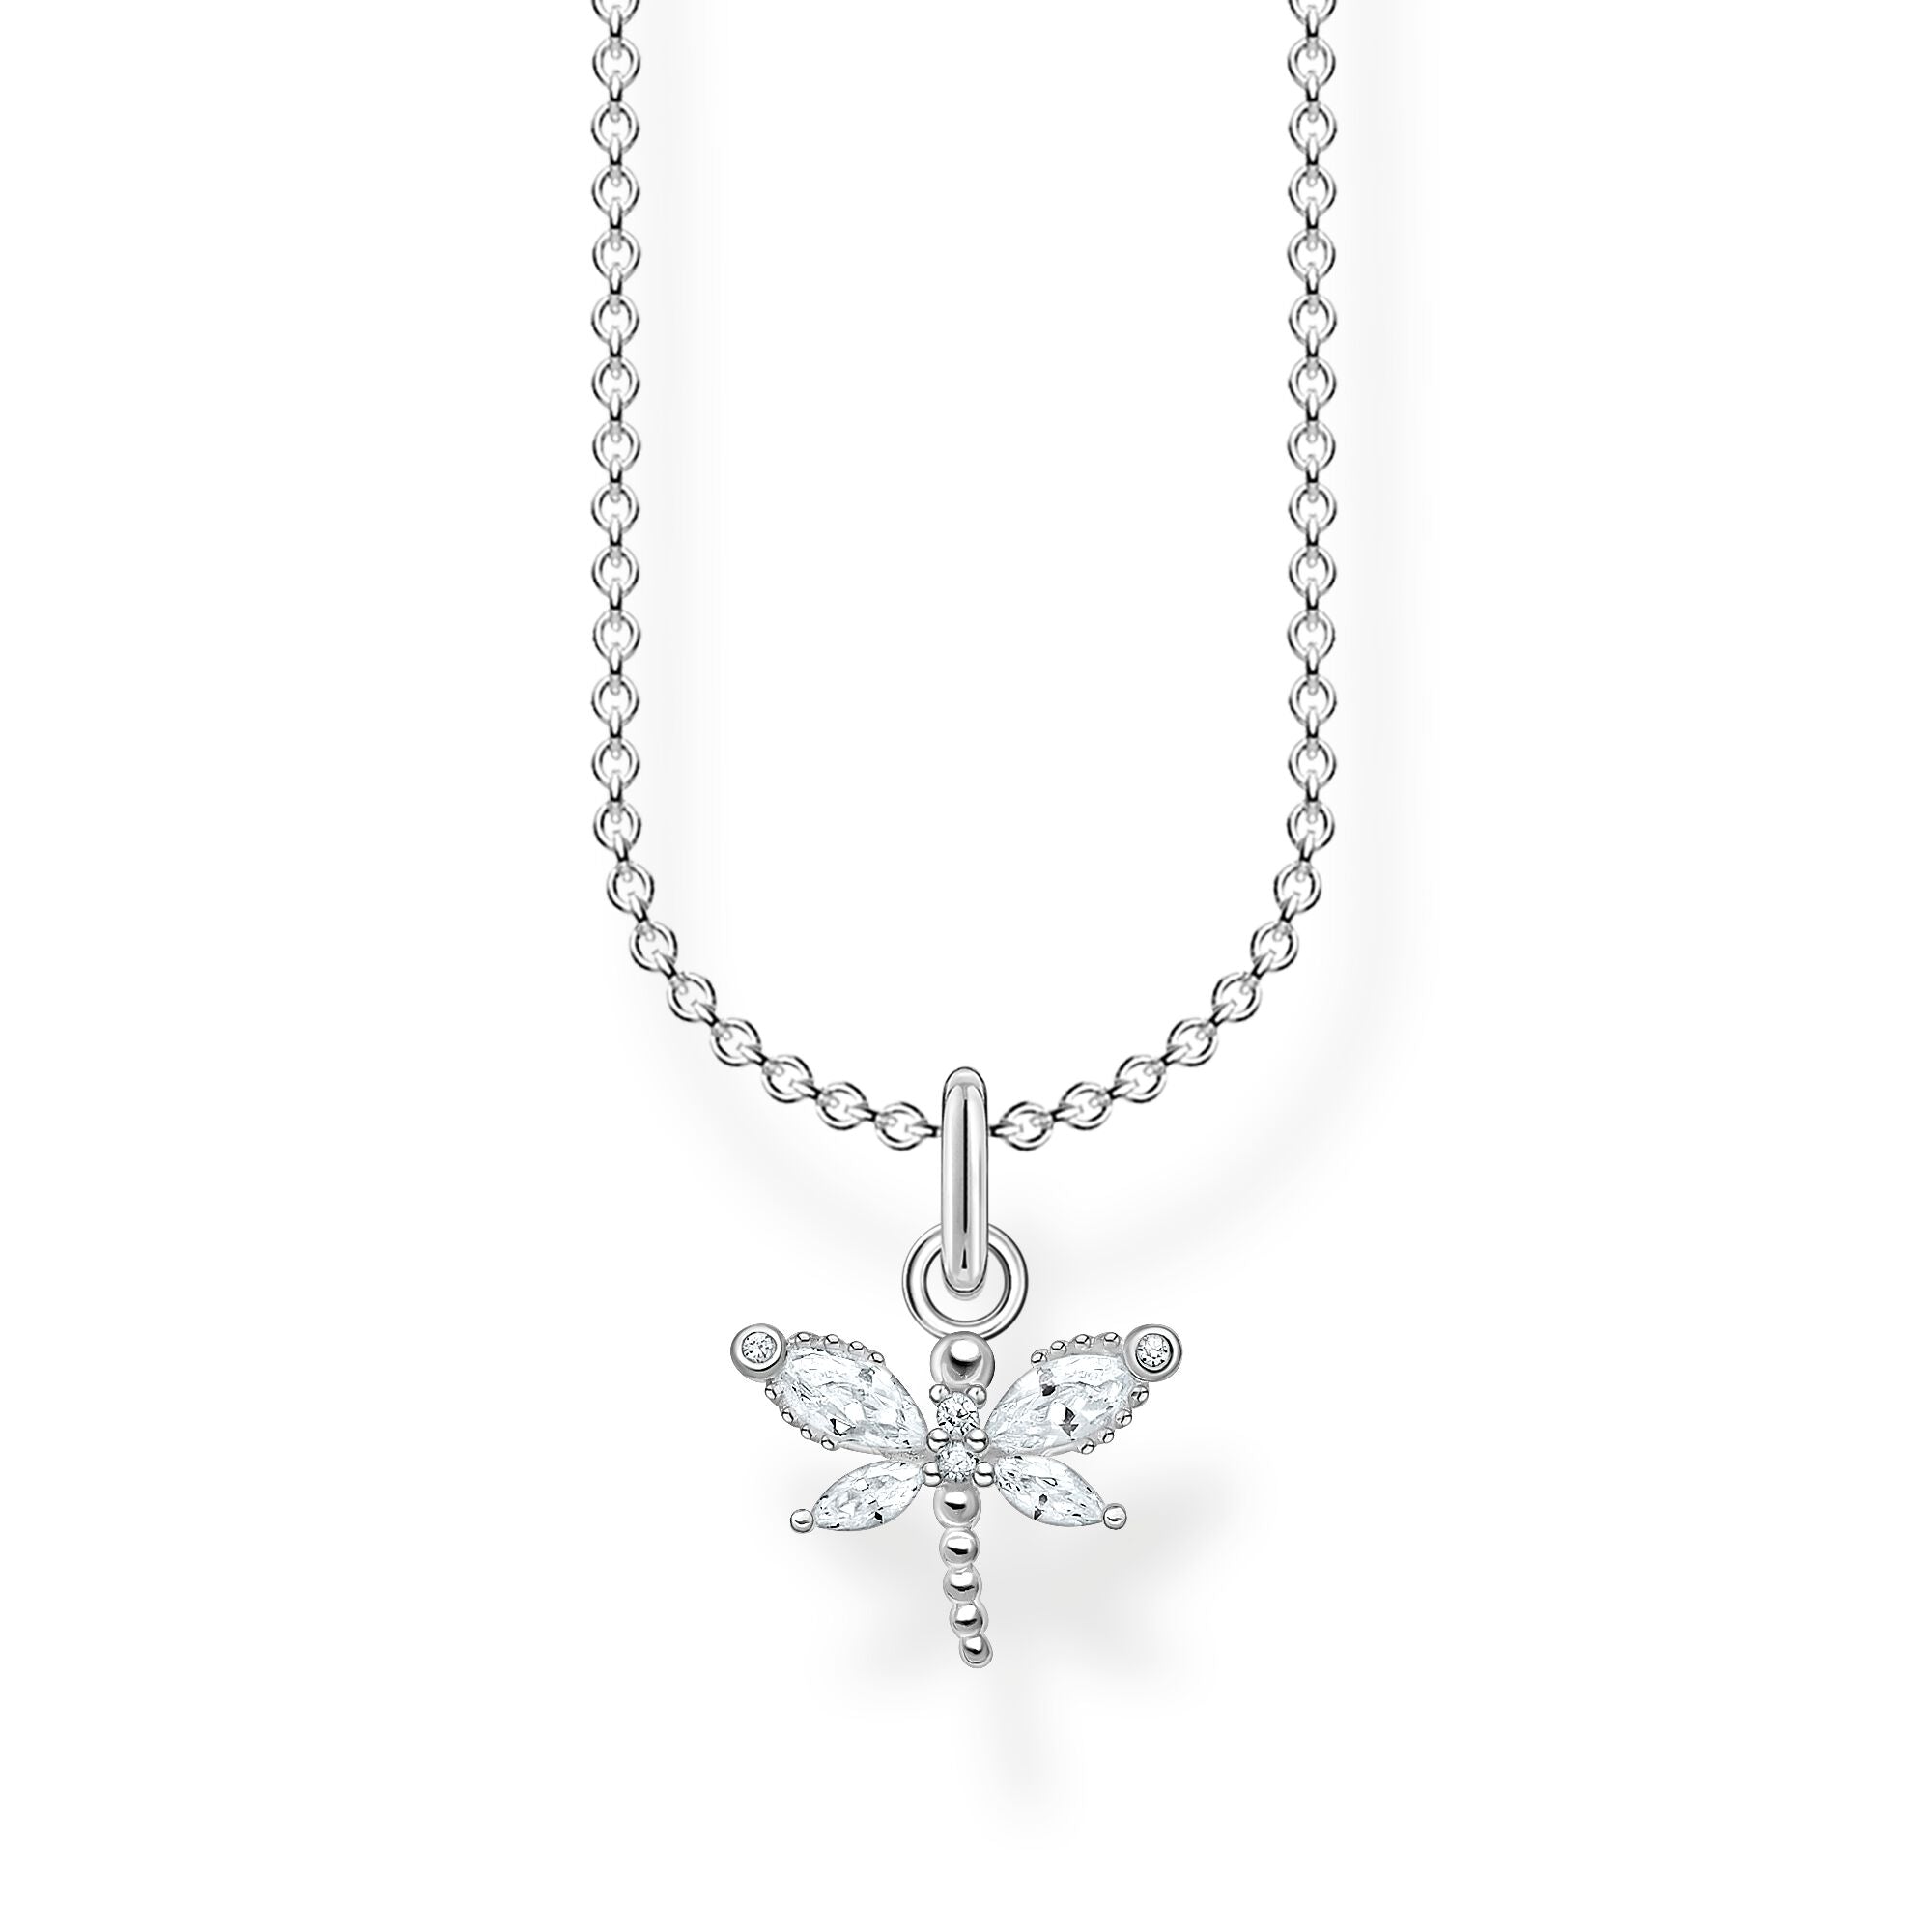 White Stone Dragonfly Necklace - Silver